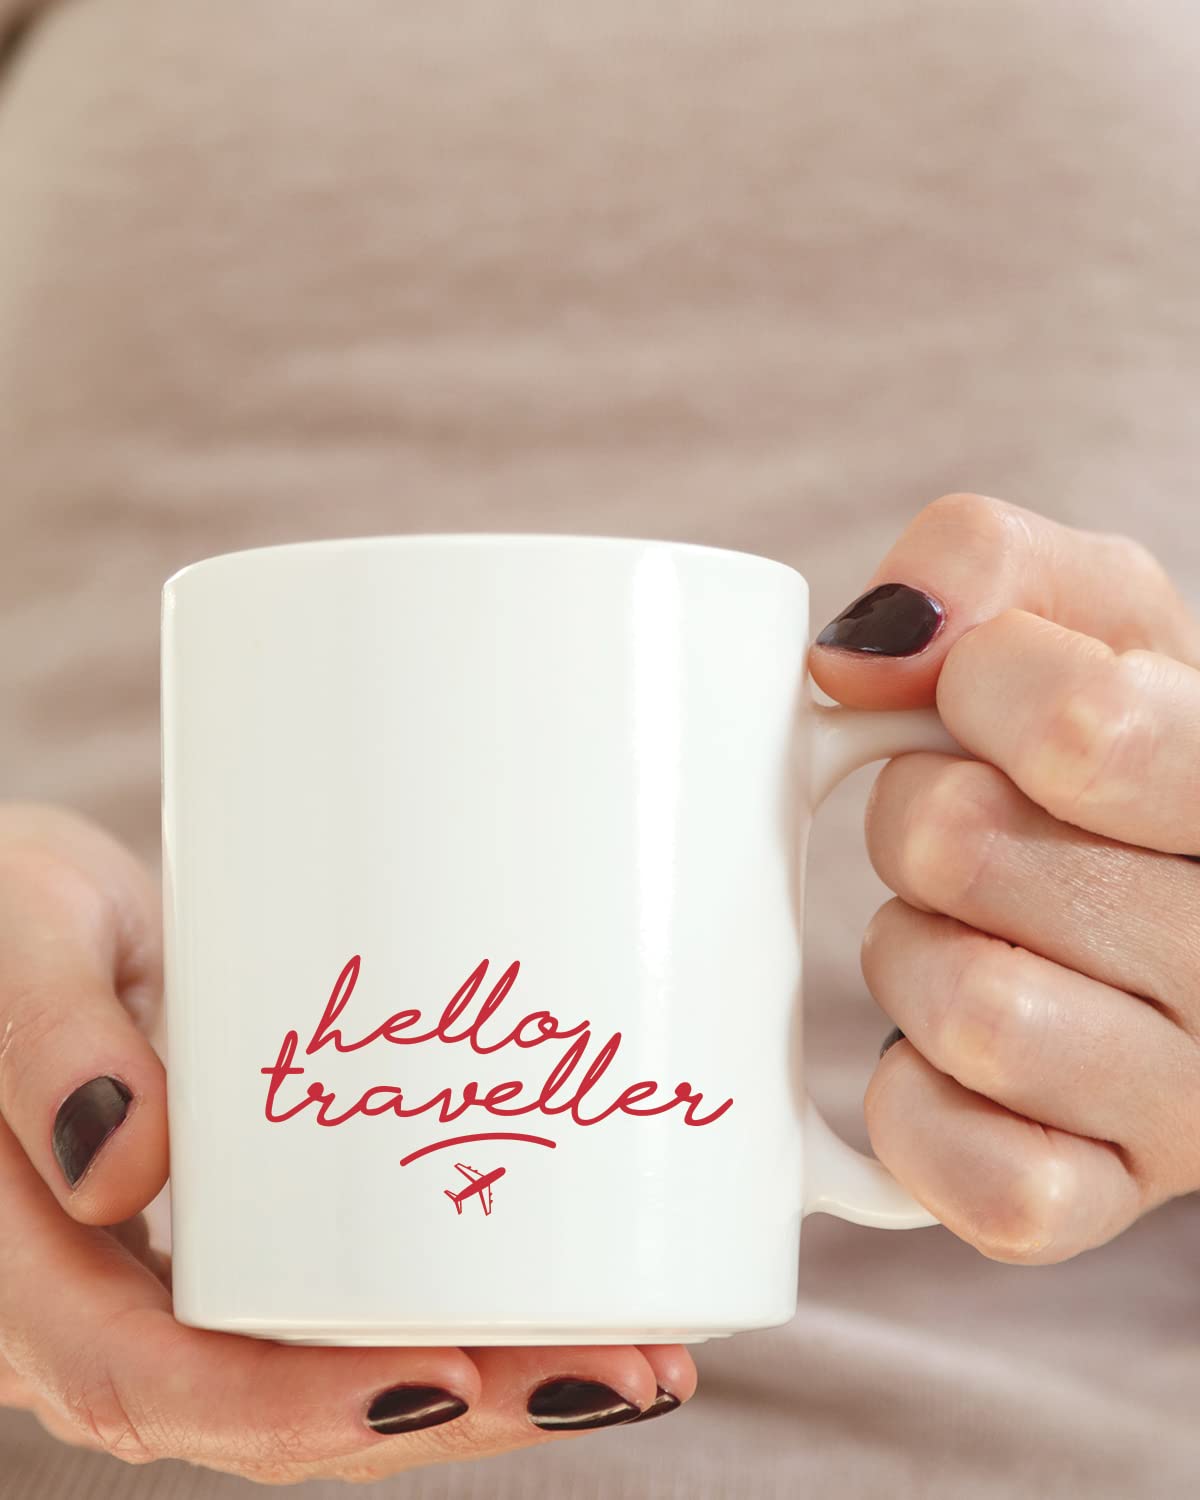 Hello Traveller Coffee Mug - Birthday Gift, Motivational Mug, Printed with Inspiring Quotes, Positivity Mug, Inspirational Gift for Him & Her, Best Friend Gift, Gifts for Her, Cheer Up Gift